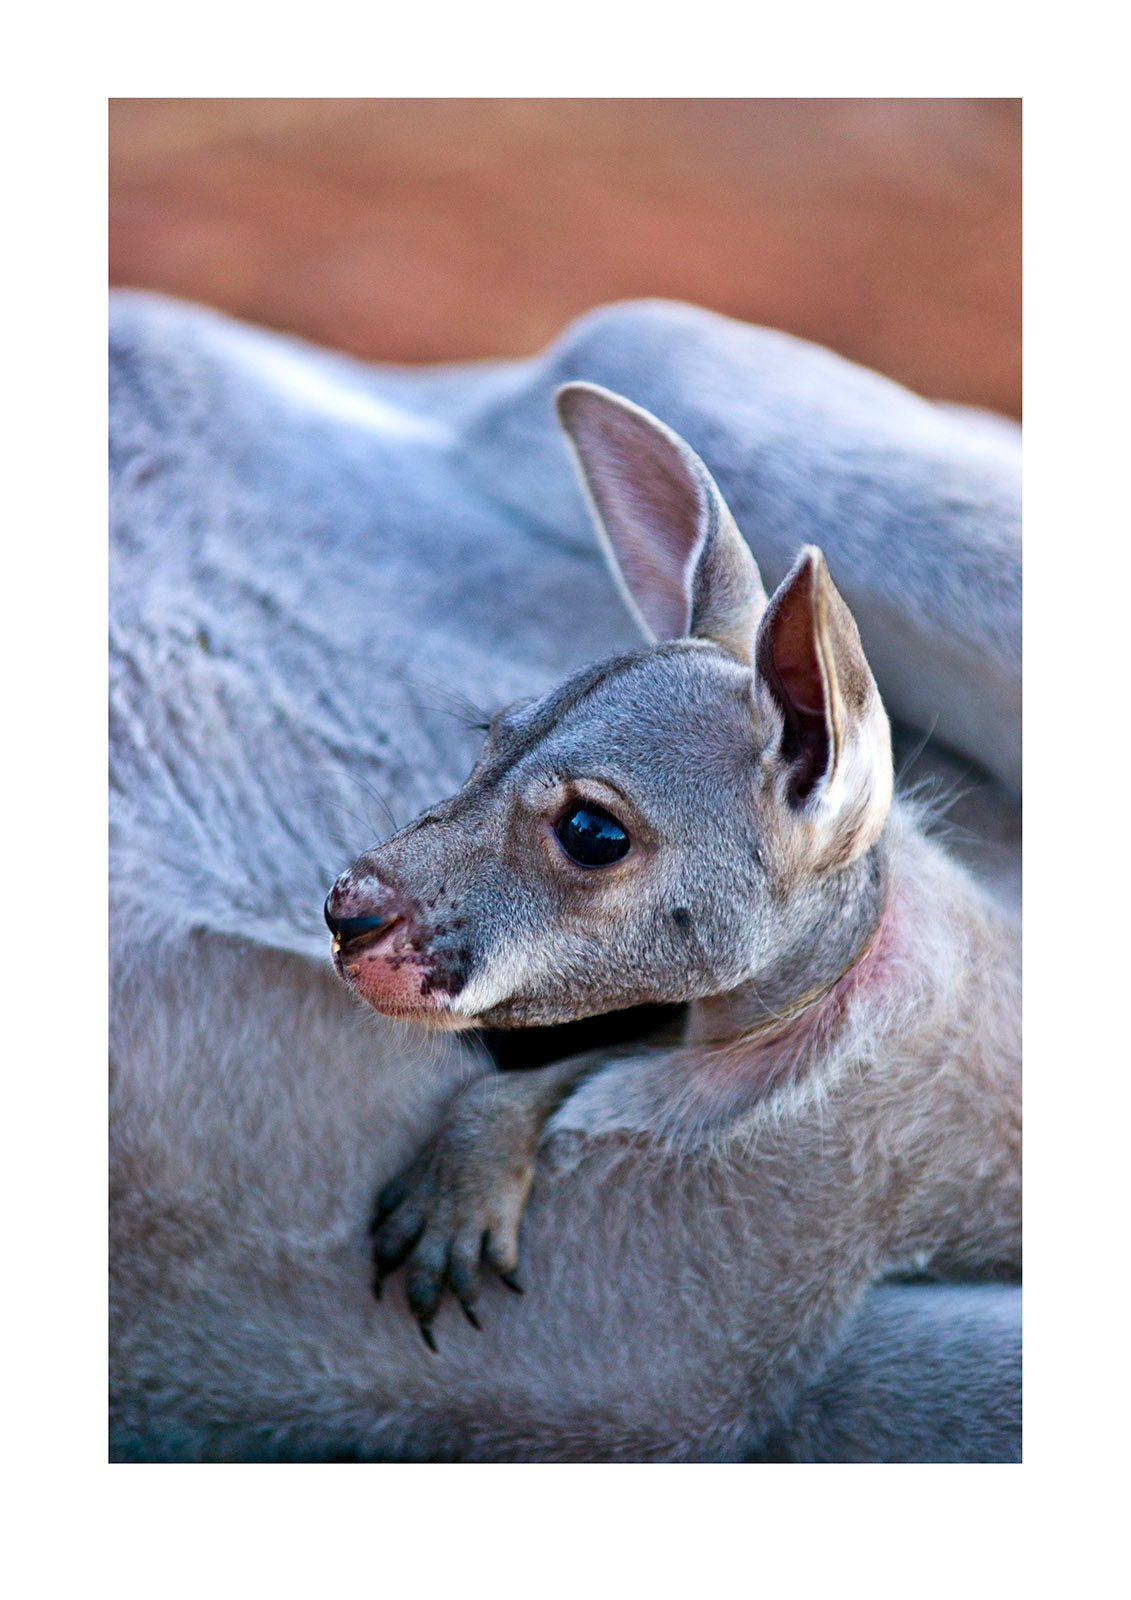 A Red Kangaroo joey emerges from it's mothers pouch. Sturt National Park, New South Wales, Australia.